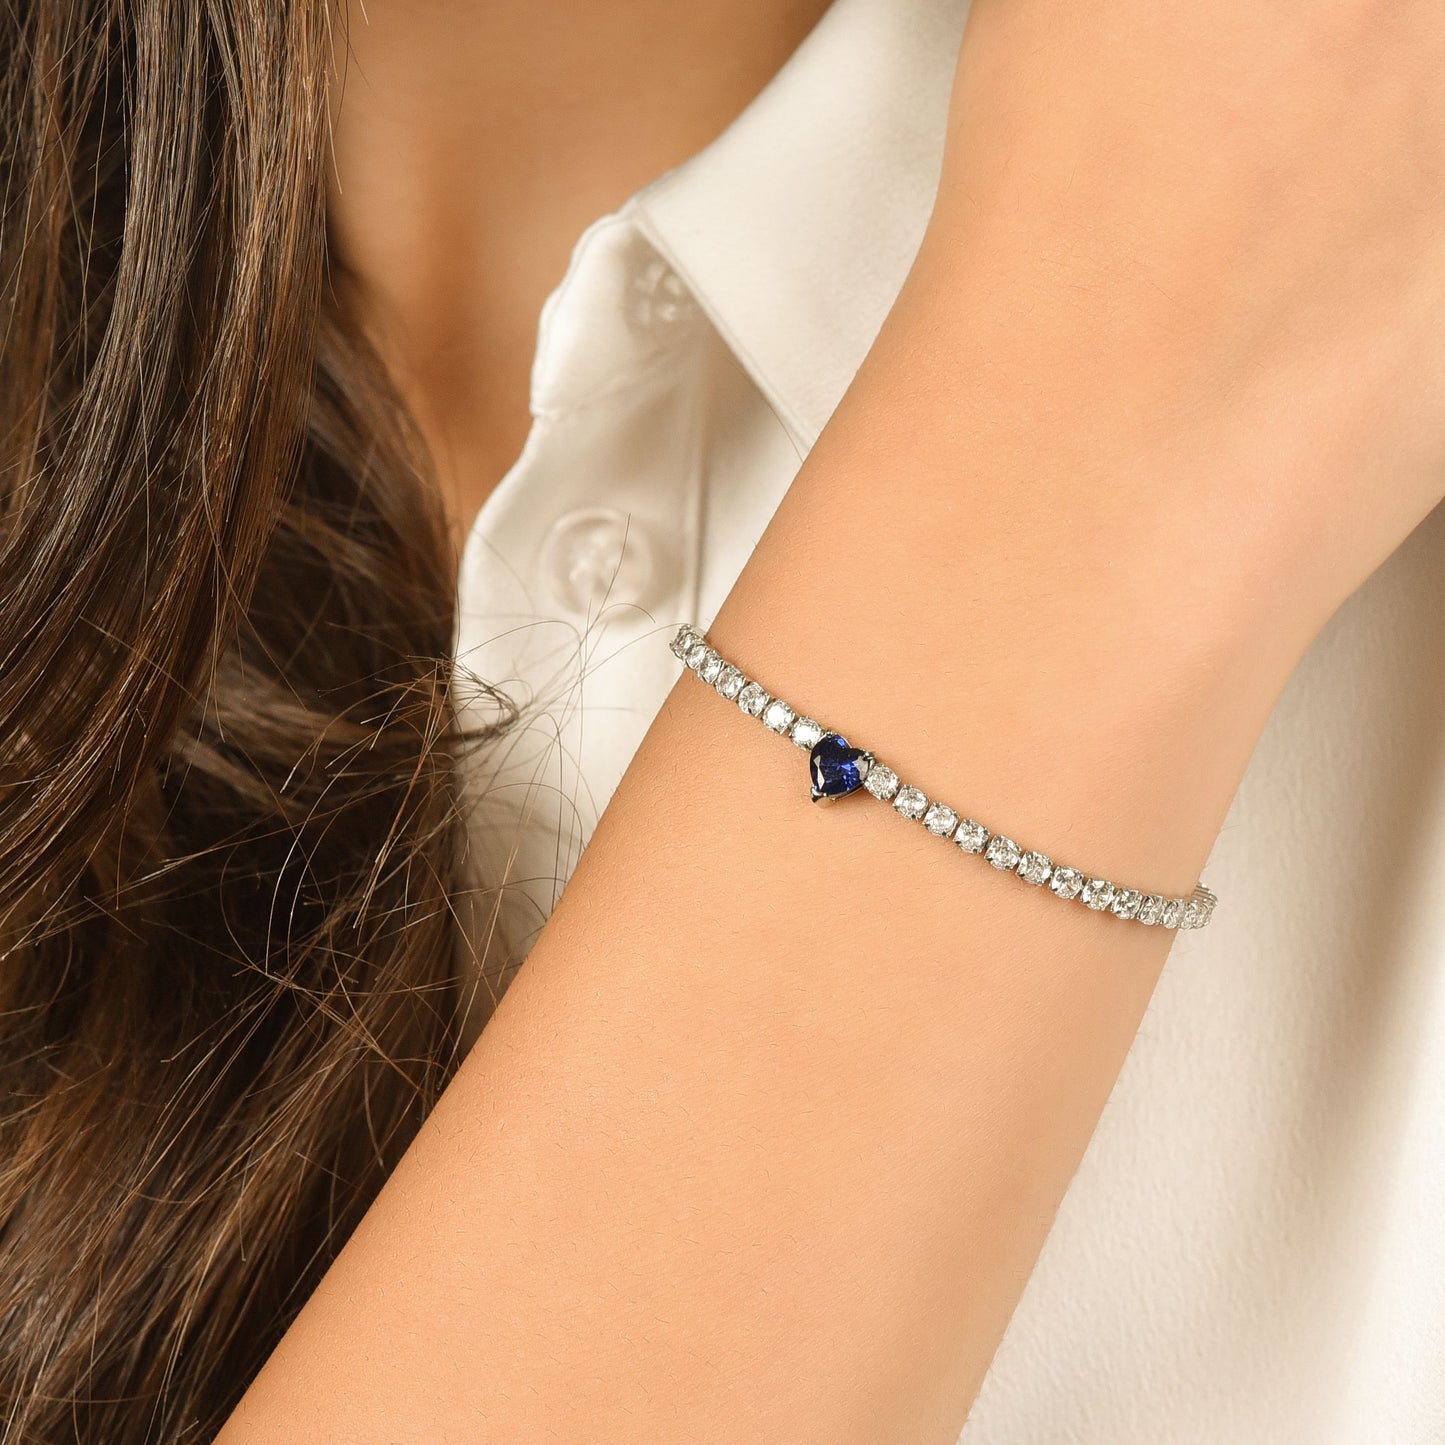 WOMEN'S STEEL TENNIS BRACELET WITH WHITE CRYSTALS AND BLUE CRYSTAL HEART